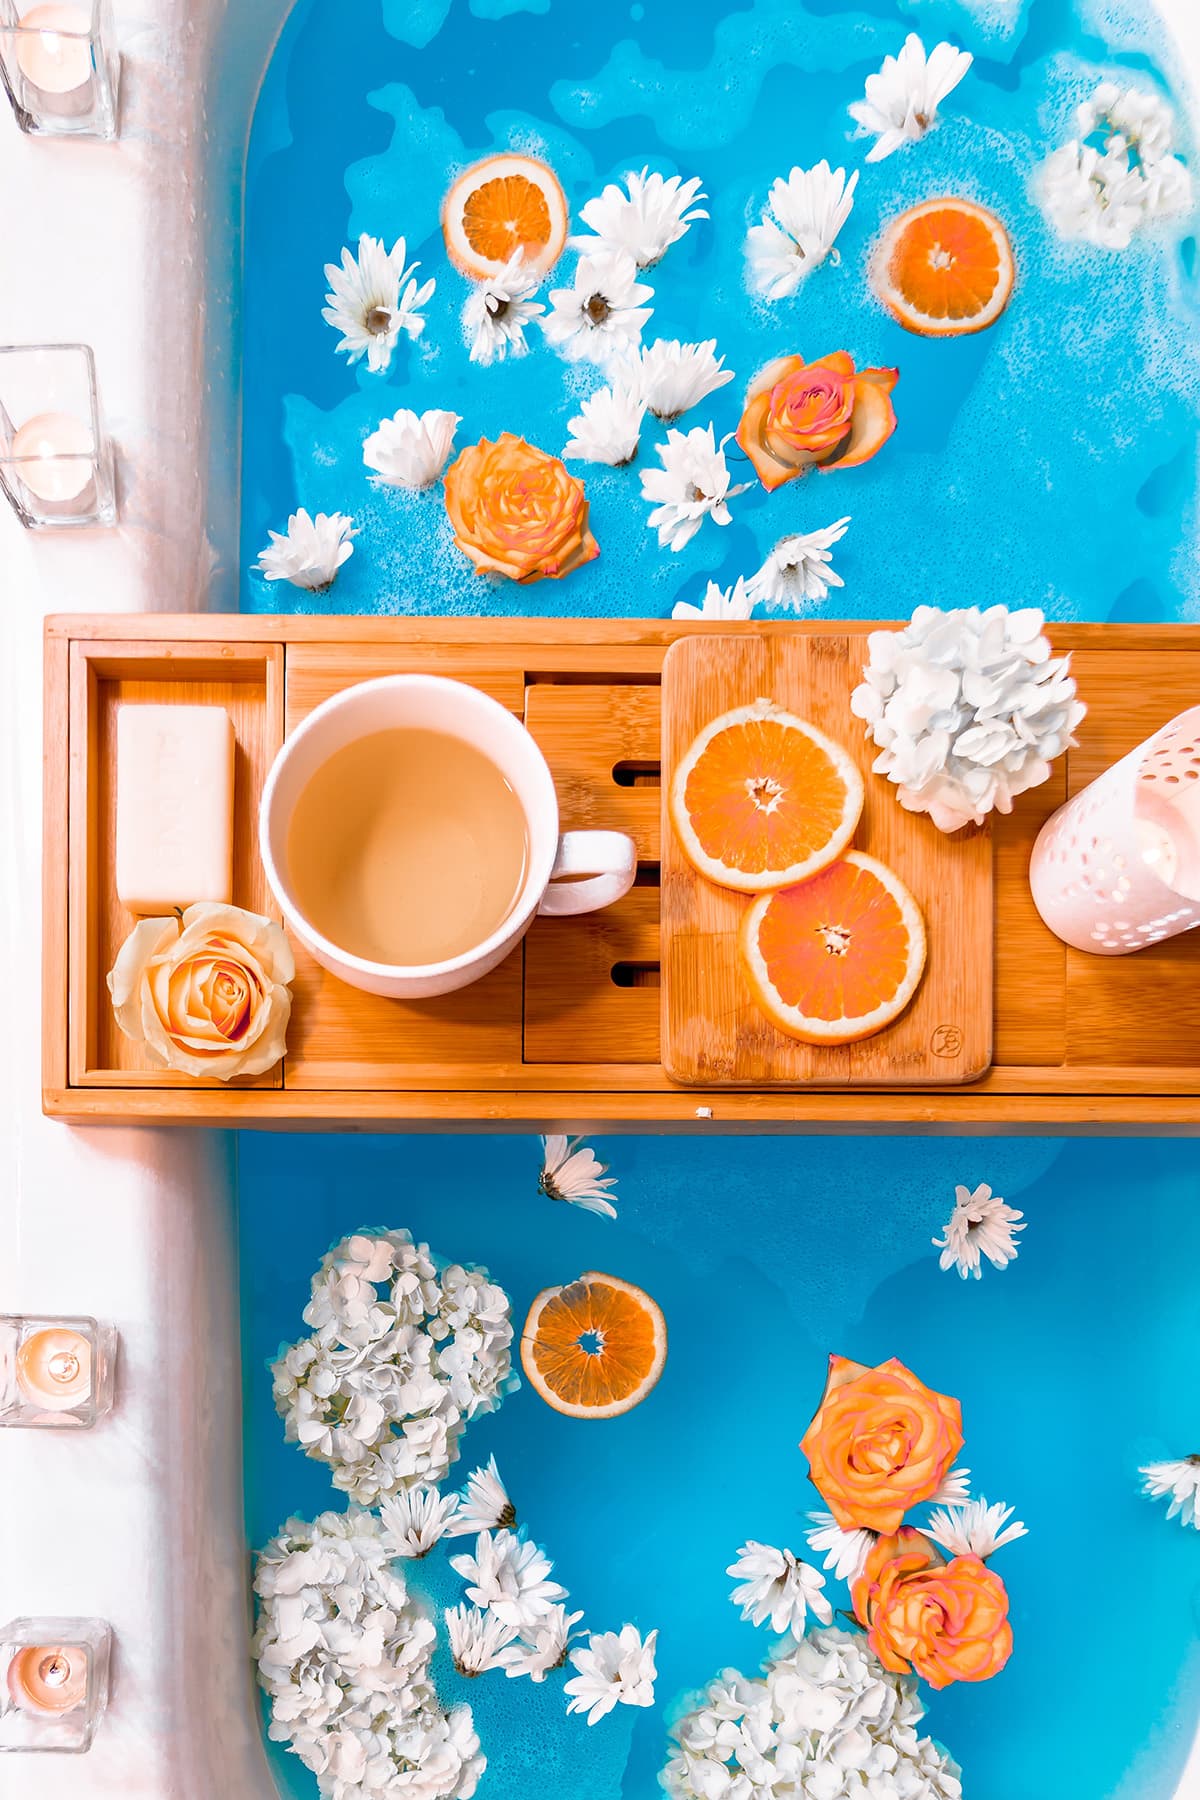 Overhead view of a bathtub filled with bright blue water and orange slices with white flowers and a wooden tray holding a cup of coffee.